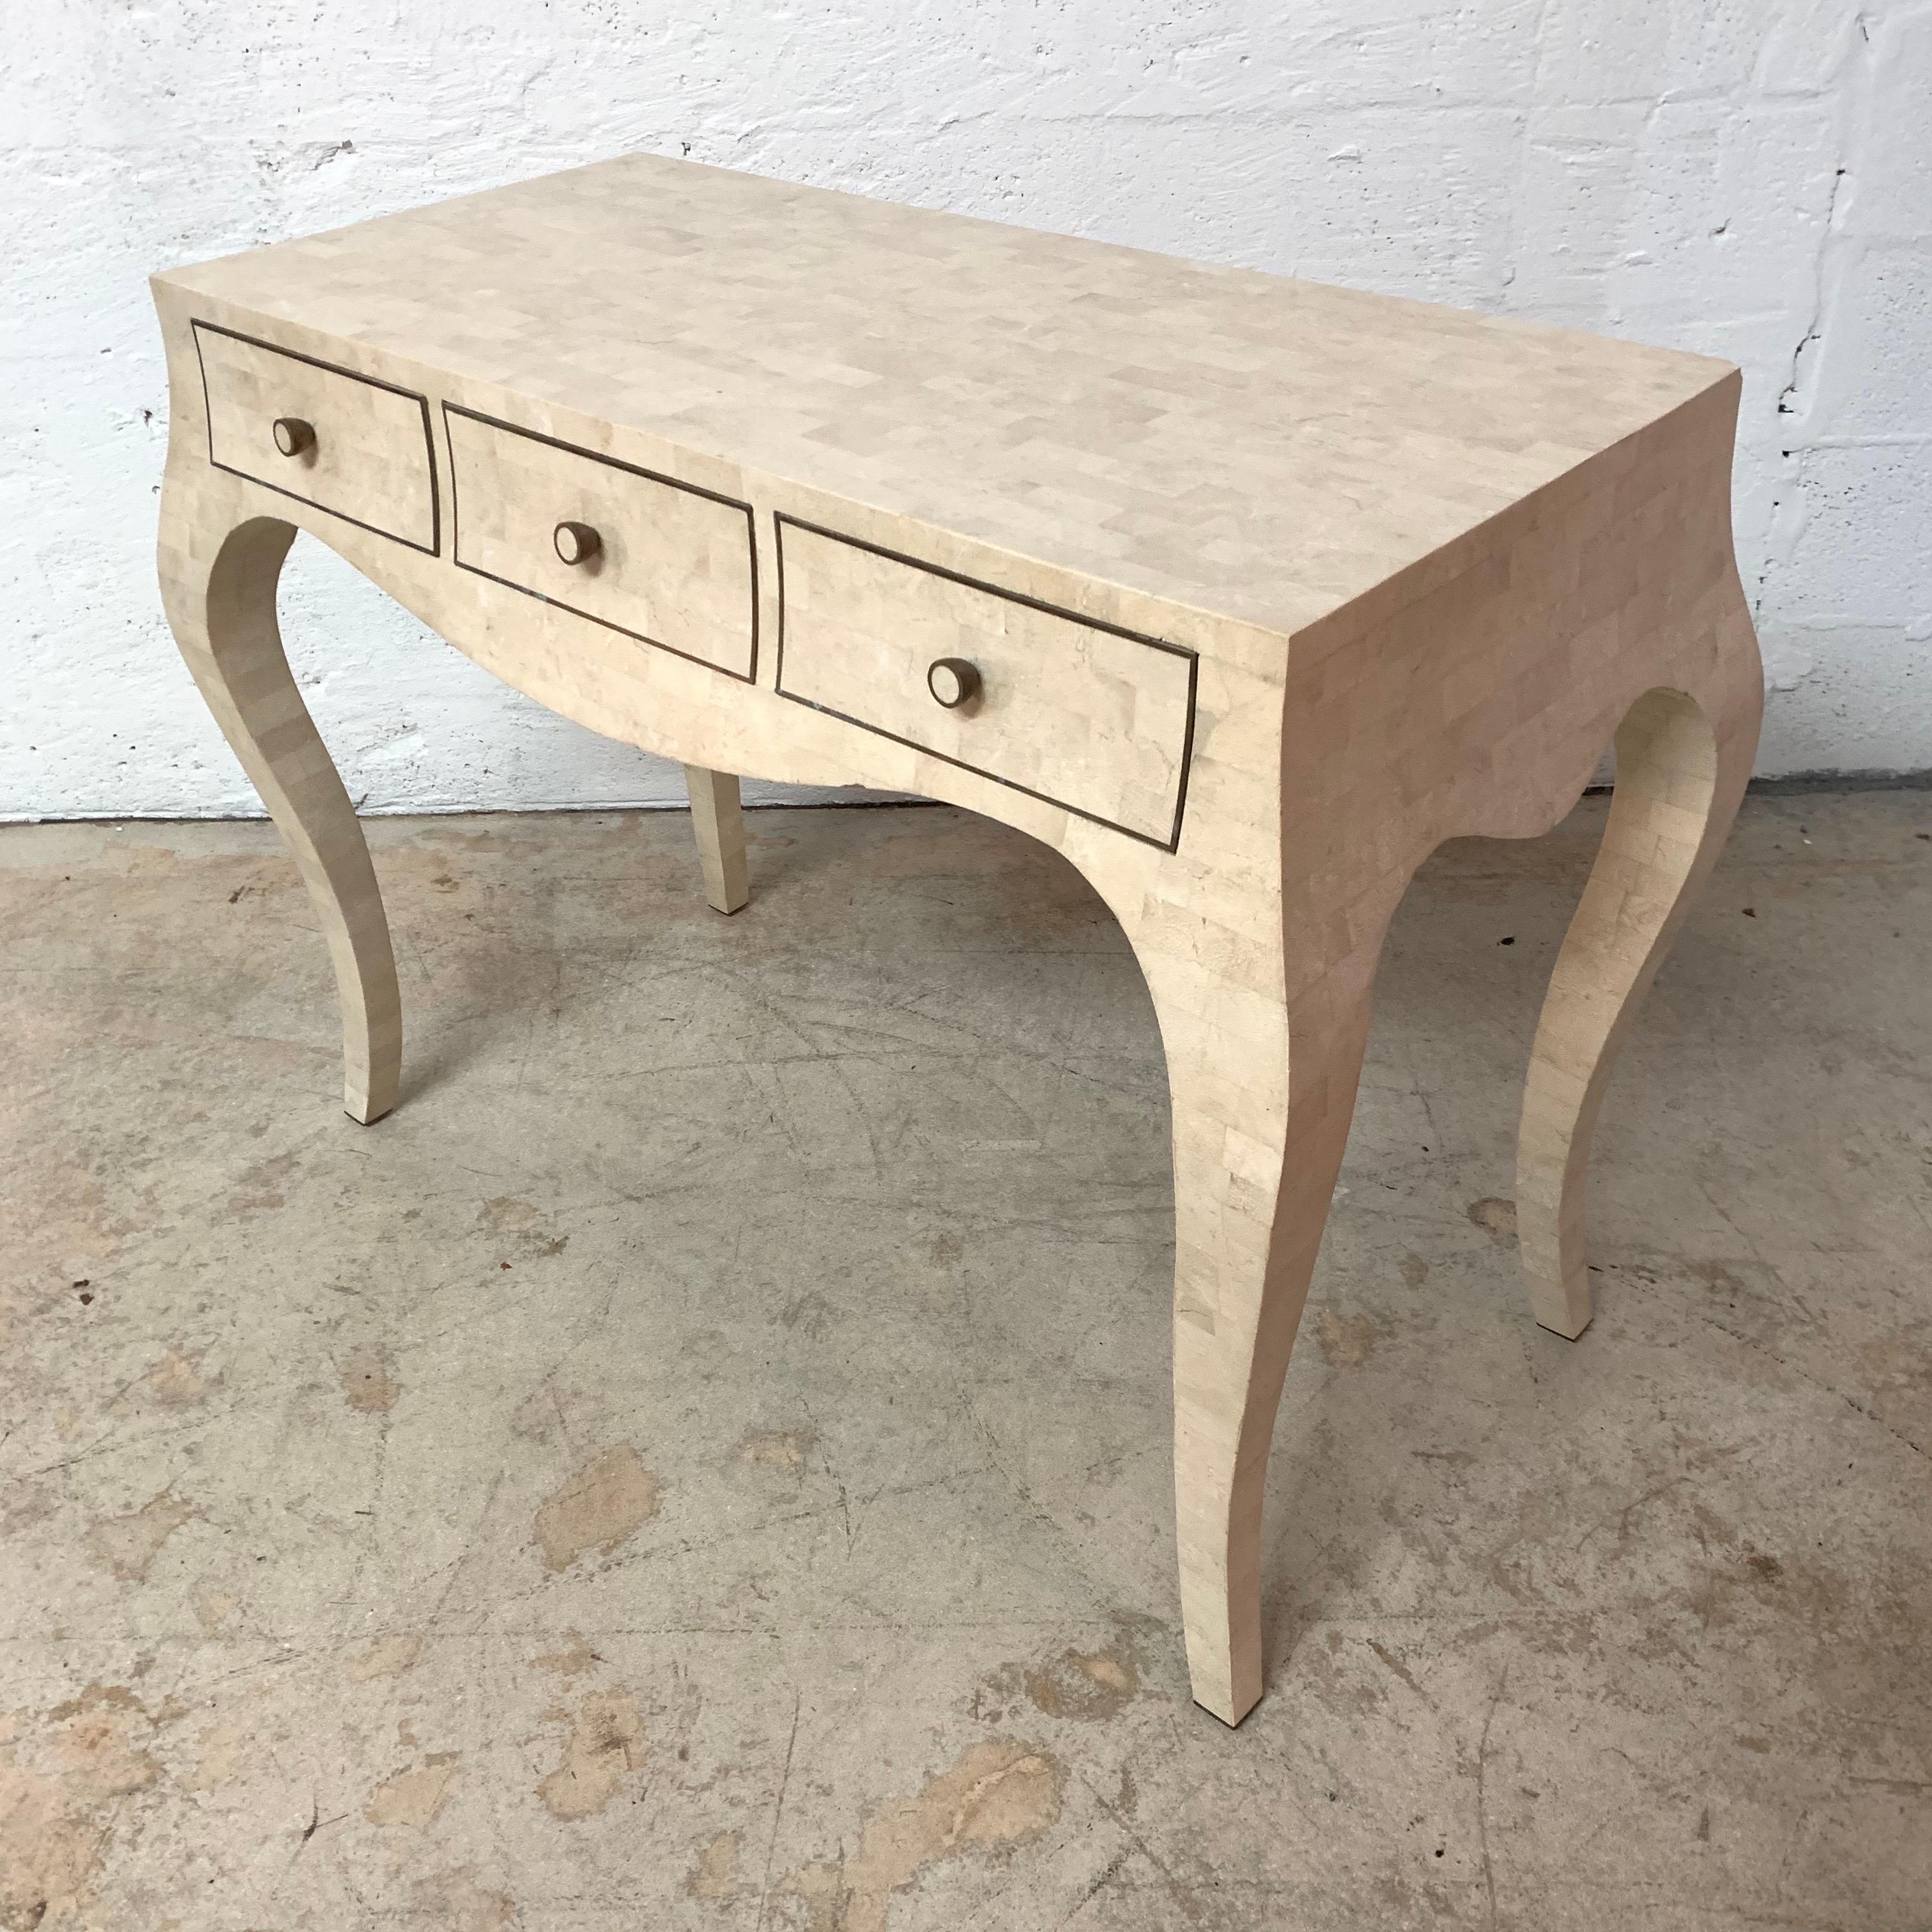 Desk or console table with cabriolet legs and 3 drawers rendered in tessellated cream ivory coral stone travertine with inlayed brass banding and knobs by Maitland Smith, Philippines, 1970s.